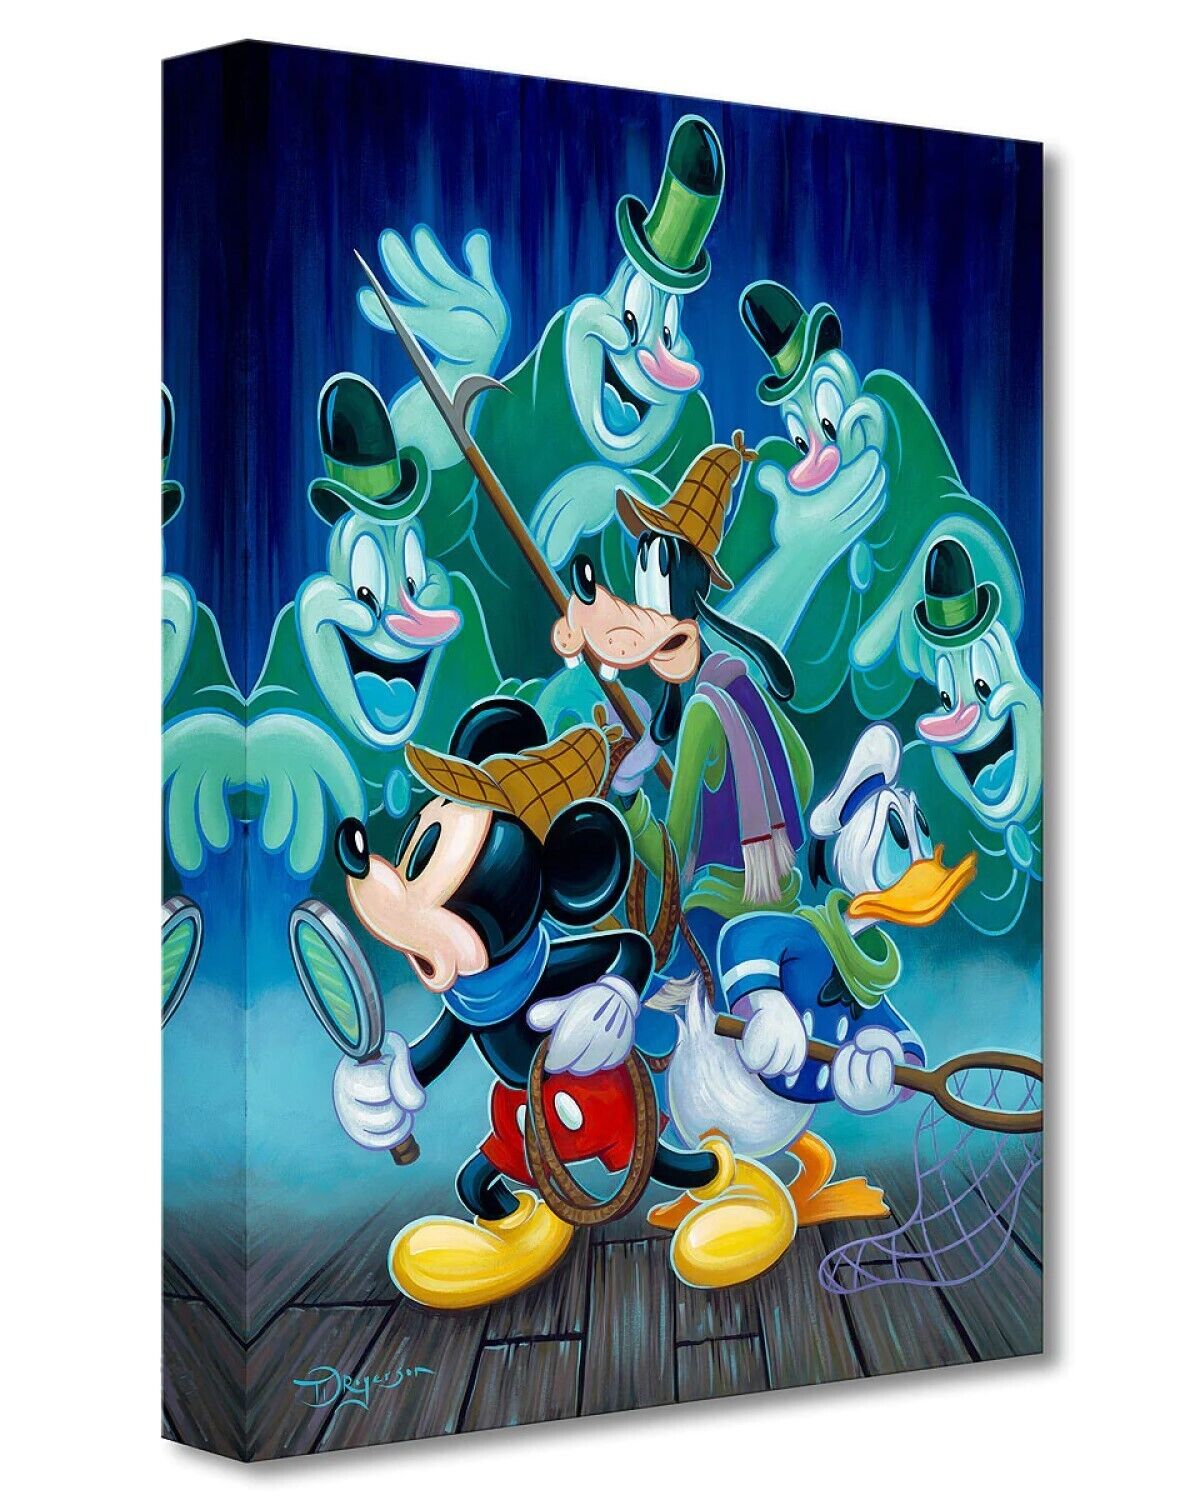 Ghost Chasers - Tim Rogerson-  Treasure On Canvas Disney Fine Art Mickey